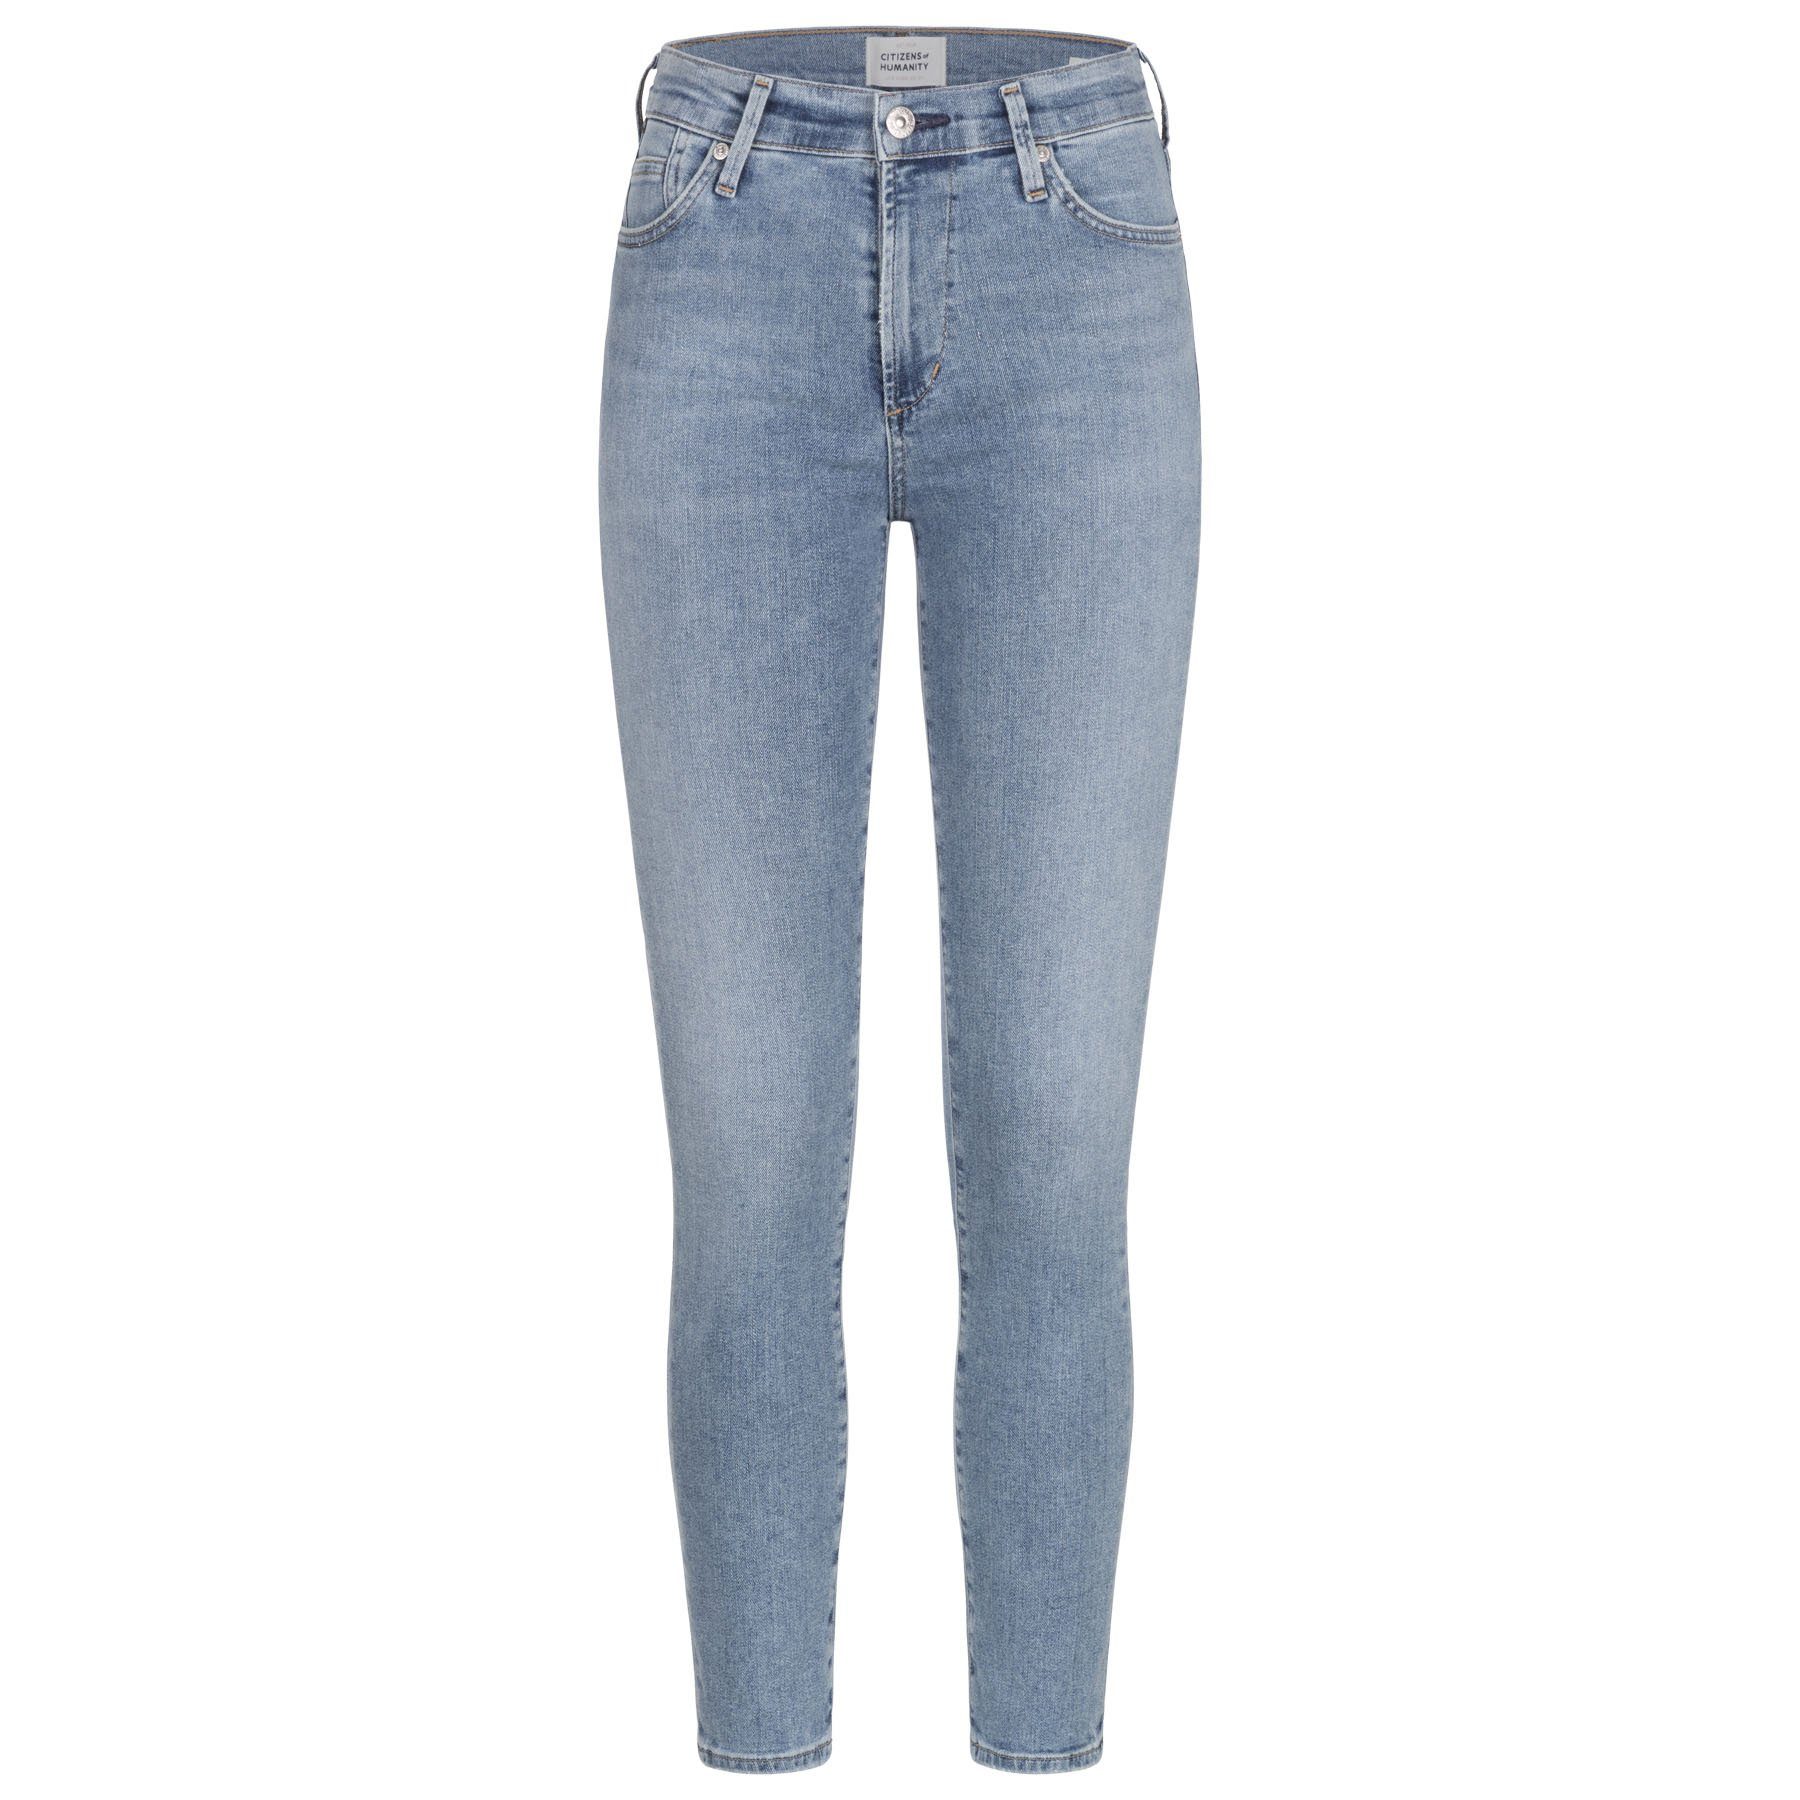 ROCKET CITIZENS Mid HUMANITY Low-rise-Jeans Waist OF Jeans ANKLE